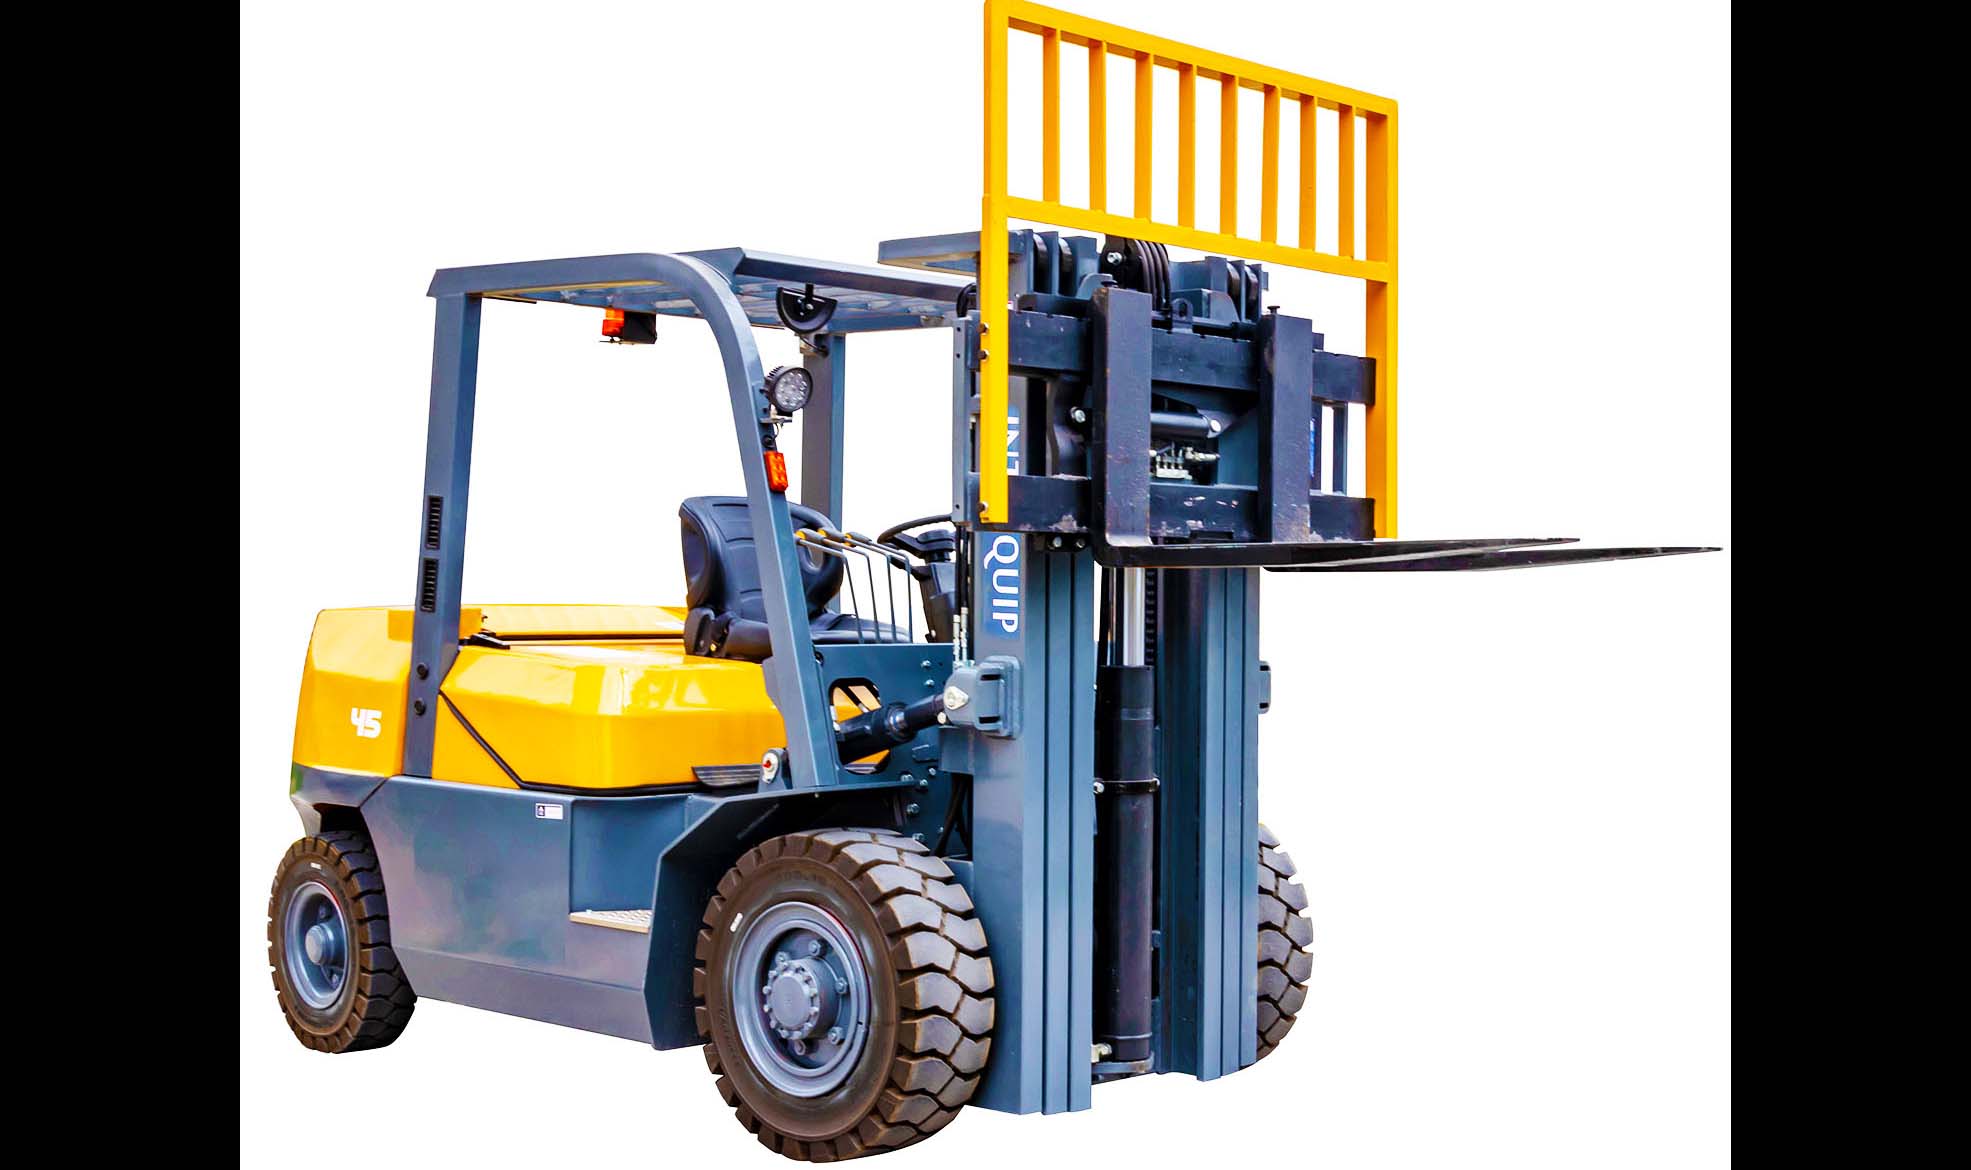 How to adjust the height of forklift fork and mast